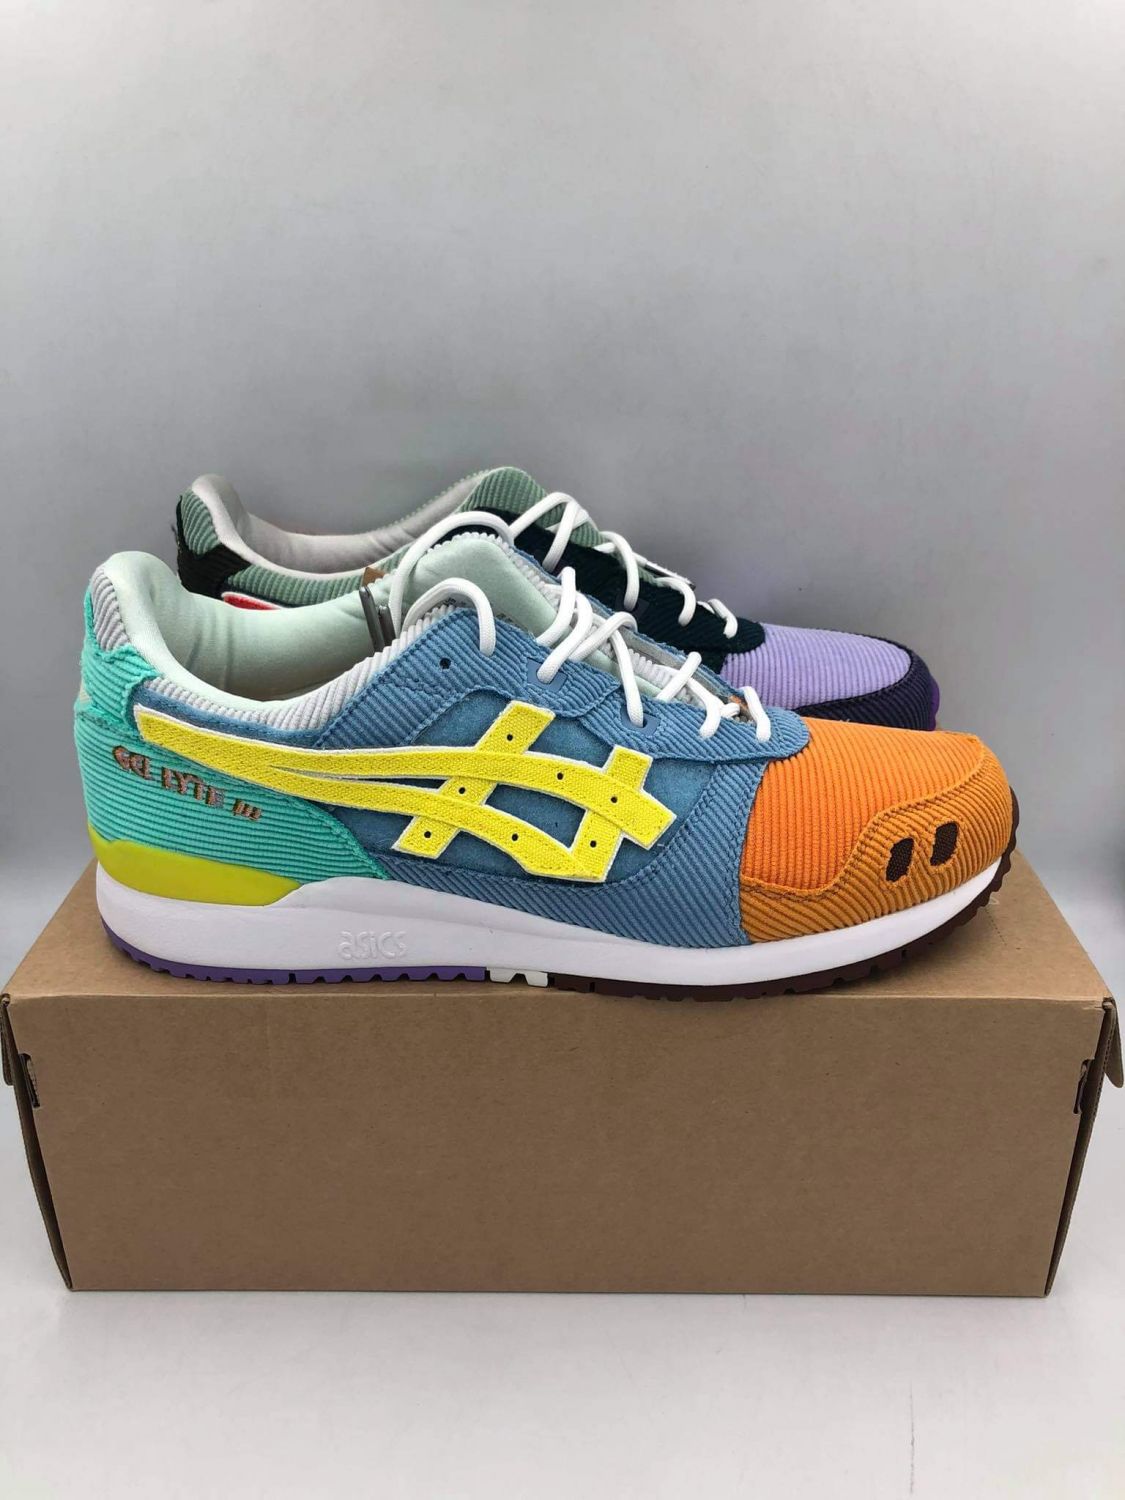 ASICS Gel-Lyte III Sean Wotherspoon X Atmos | AfterMarket